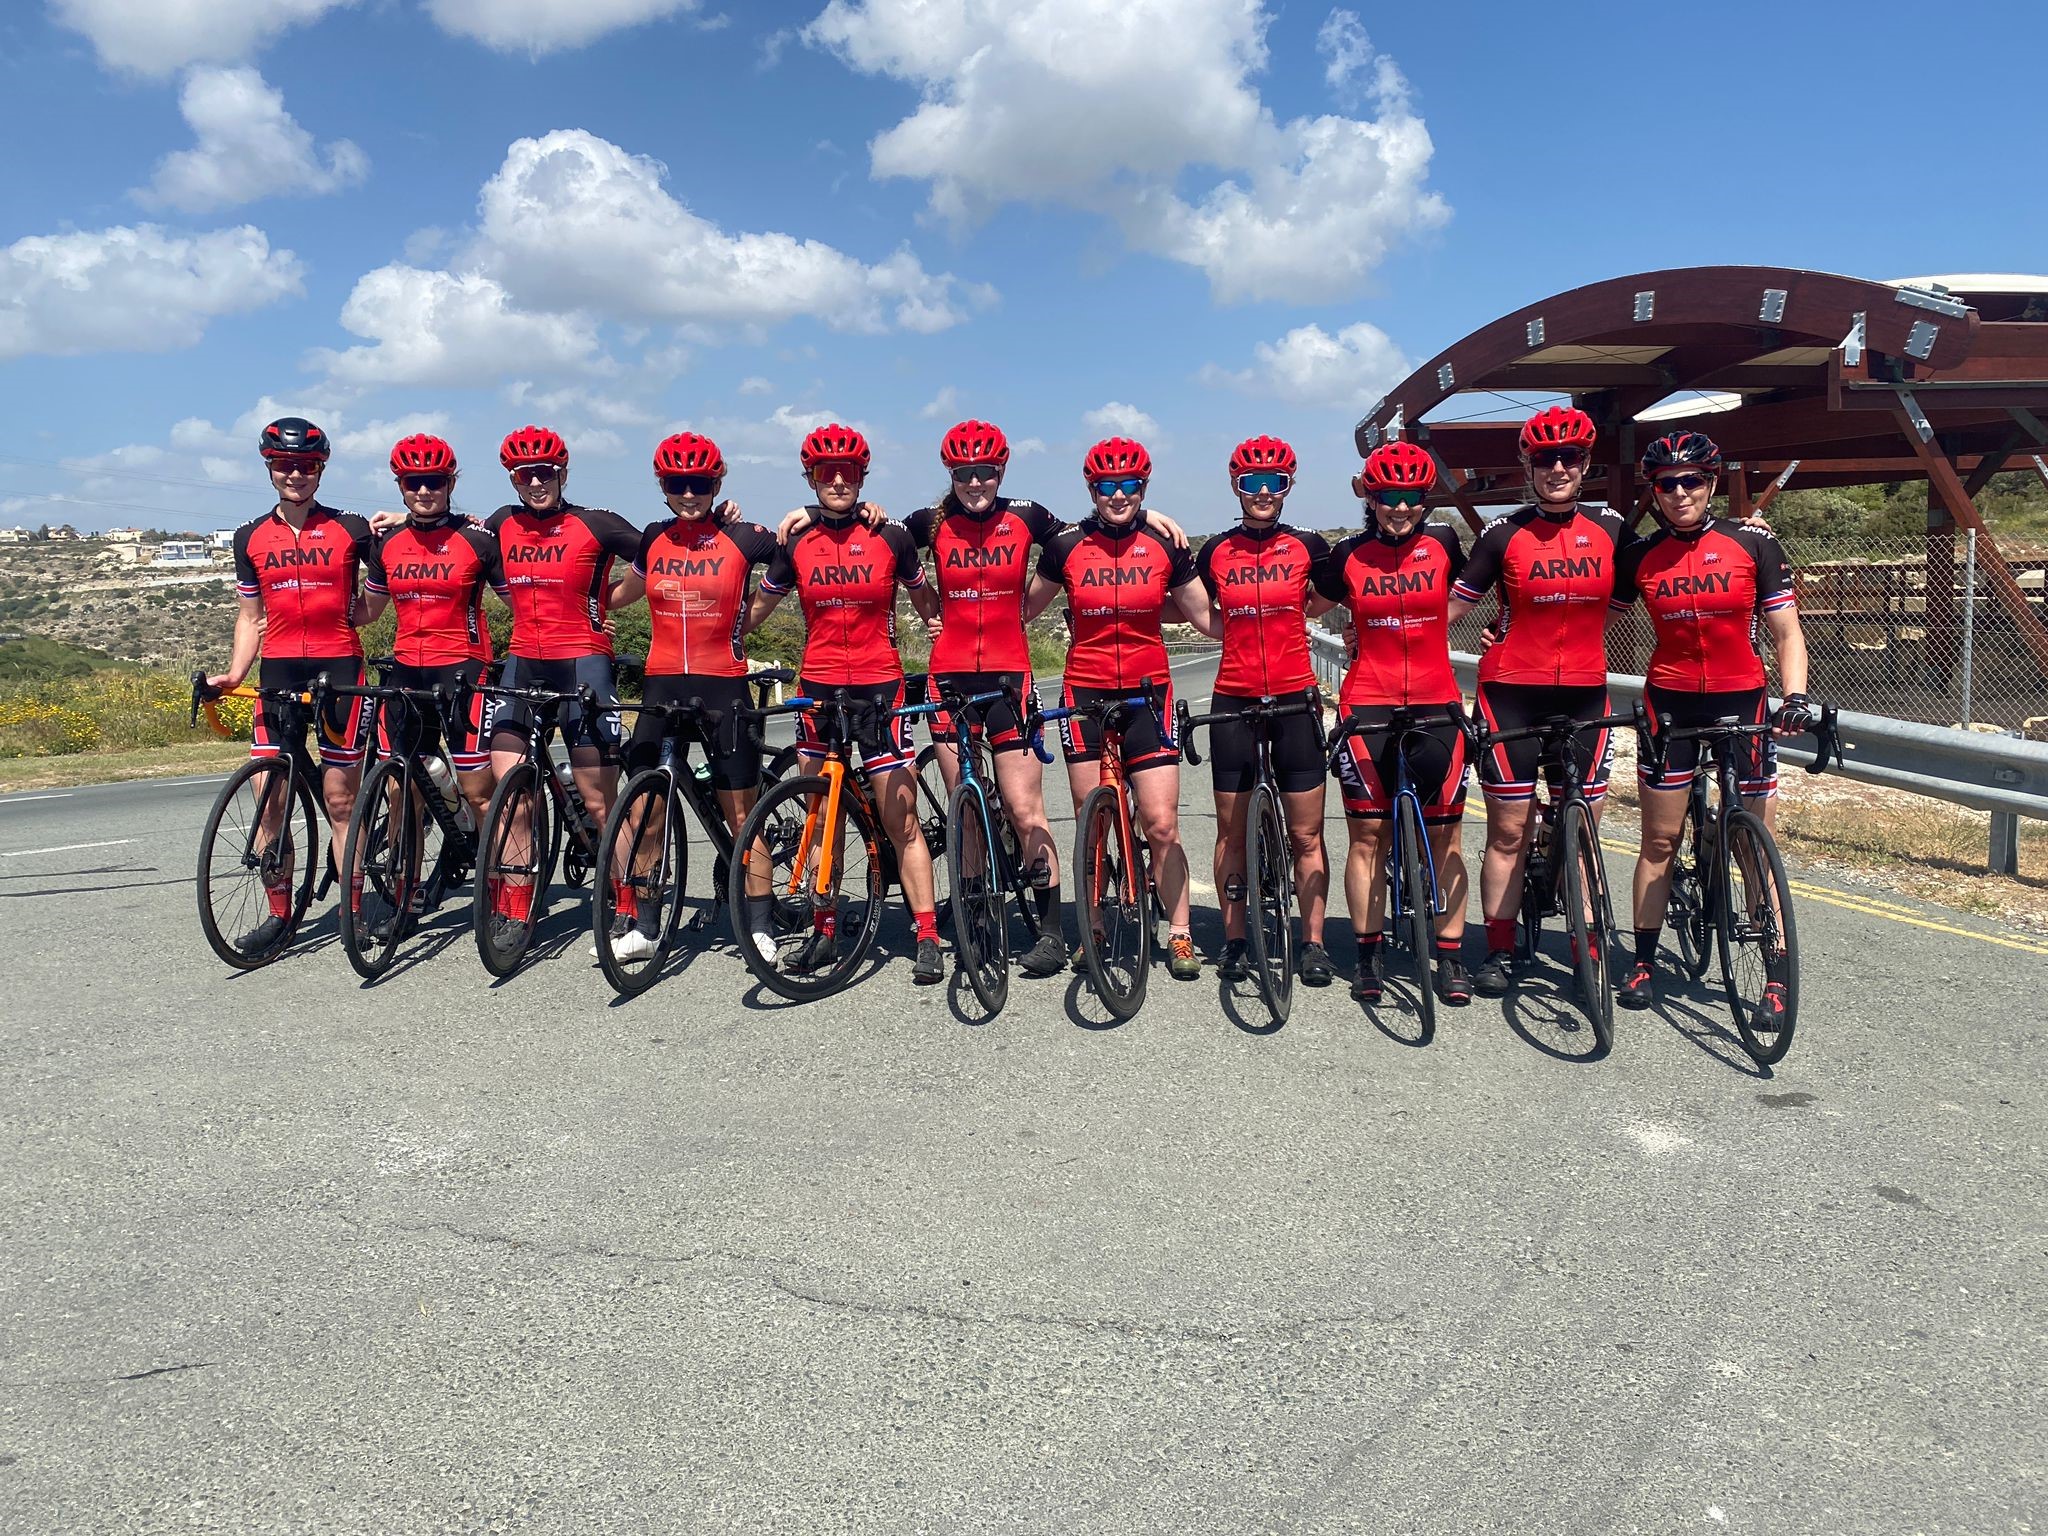 OSV: TRAINING CAMP ROAD CYCLING – CYPRUS APRIL 2022 (ARMY WOMENS ROAD CYCLING TEAM)